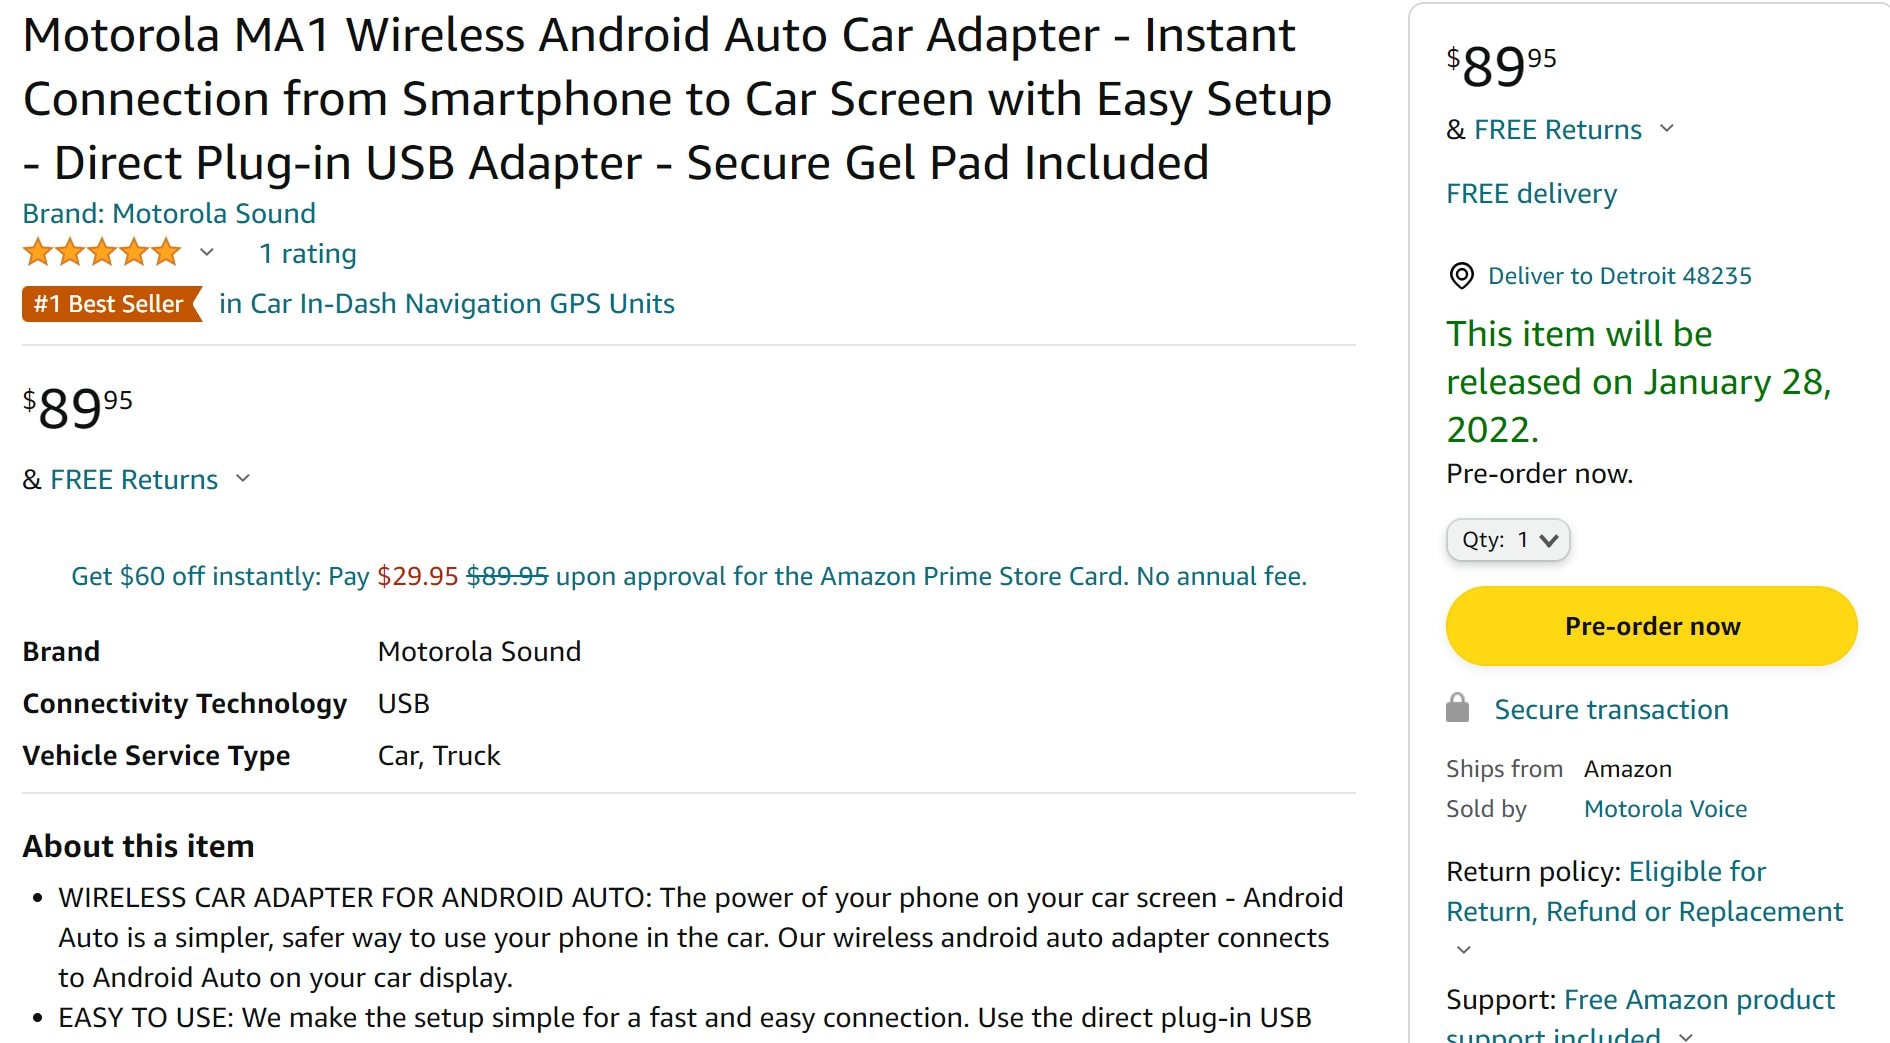 https://s1.cdn.autoevolution.com/images/news/motorolas-wireless-android-auto-adapter-finally-up-for-grabs-get-it-while-you-can-180224_1.jpg